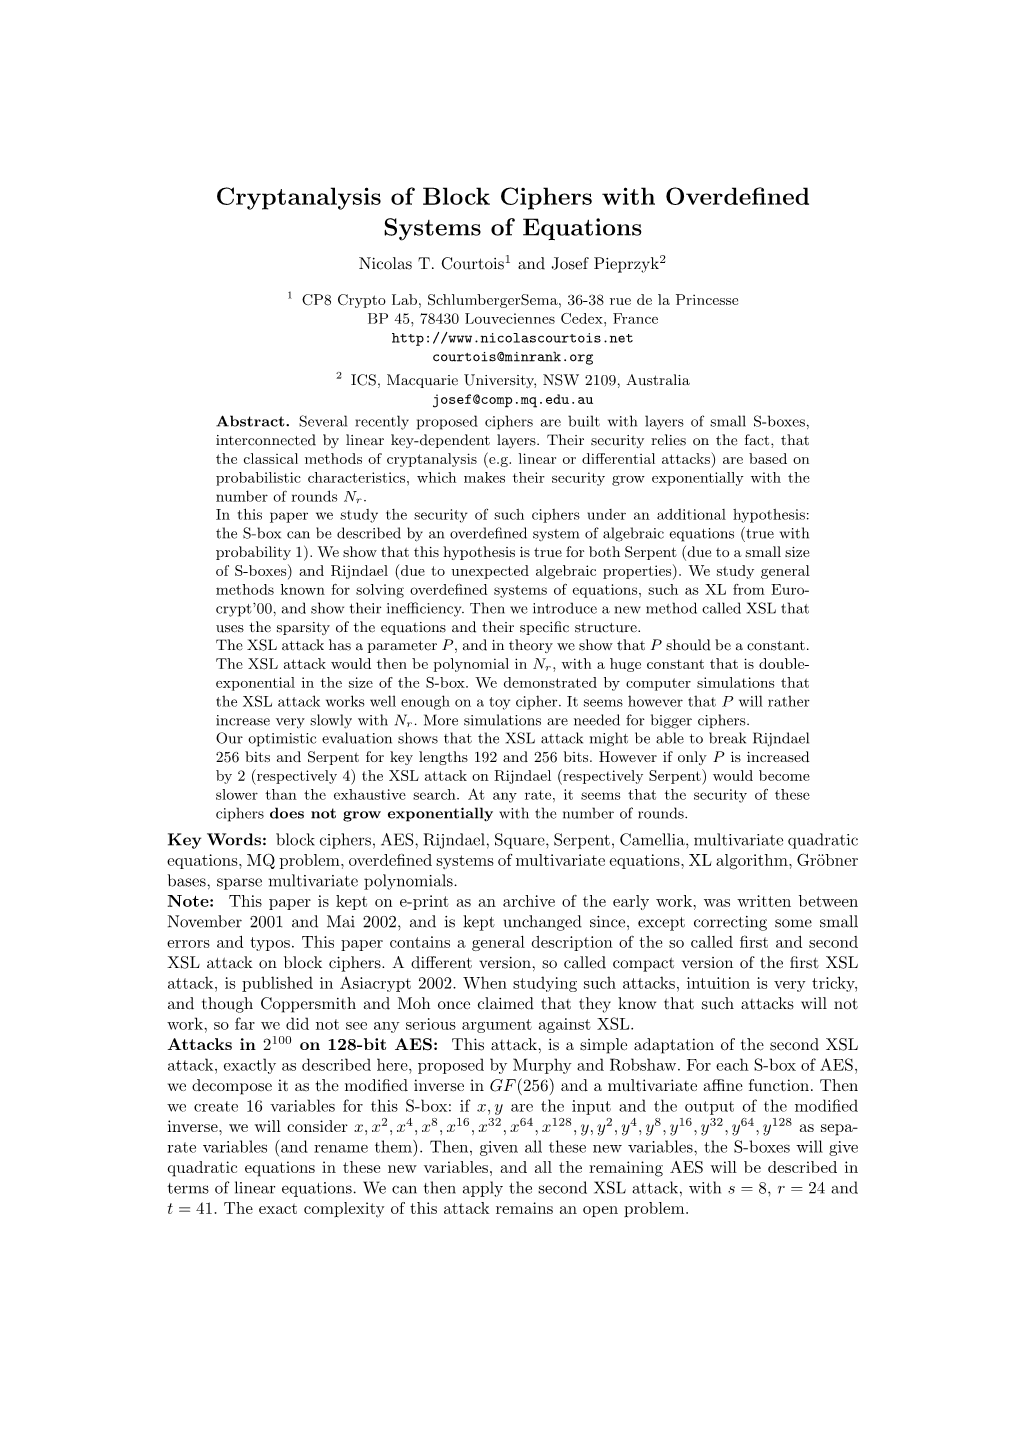 Cryptanalysis of Block Ciphers with Overdefined Systems of Equations